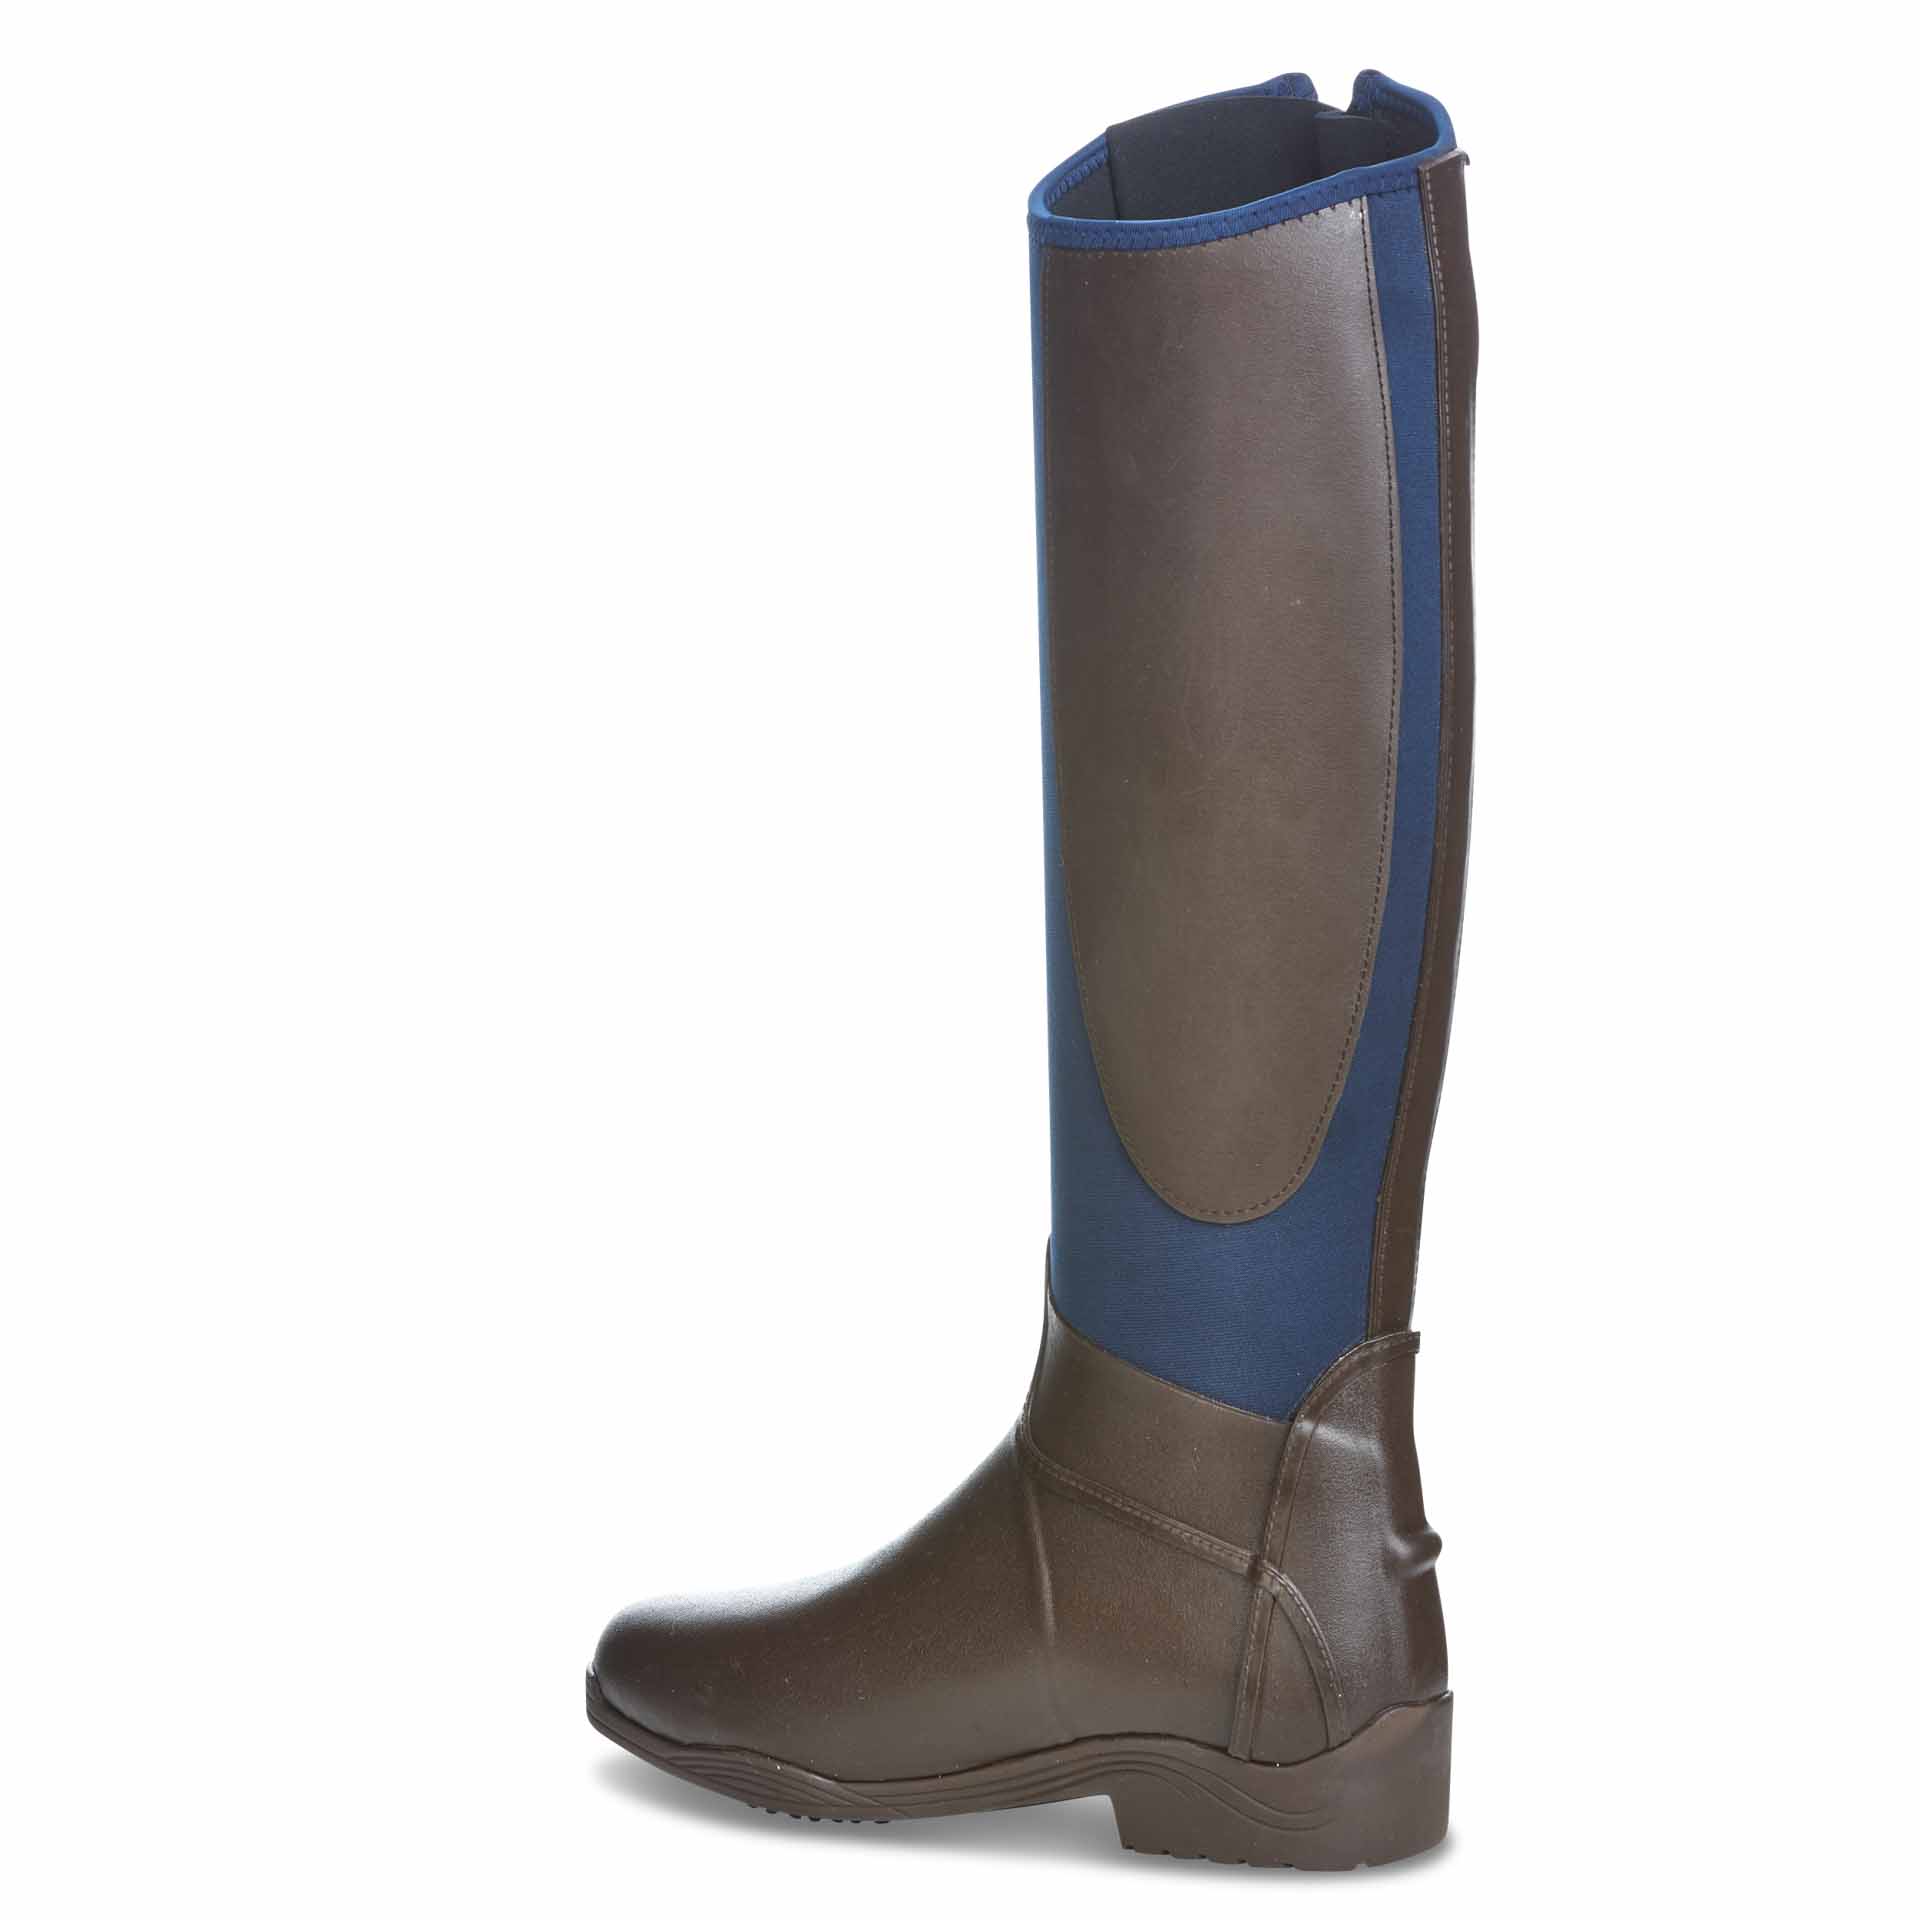 BUSSE Riding Mud Boots CALGARY, brown/navy 40 nn